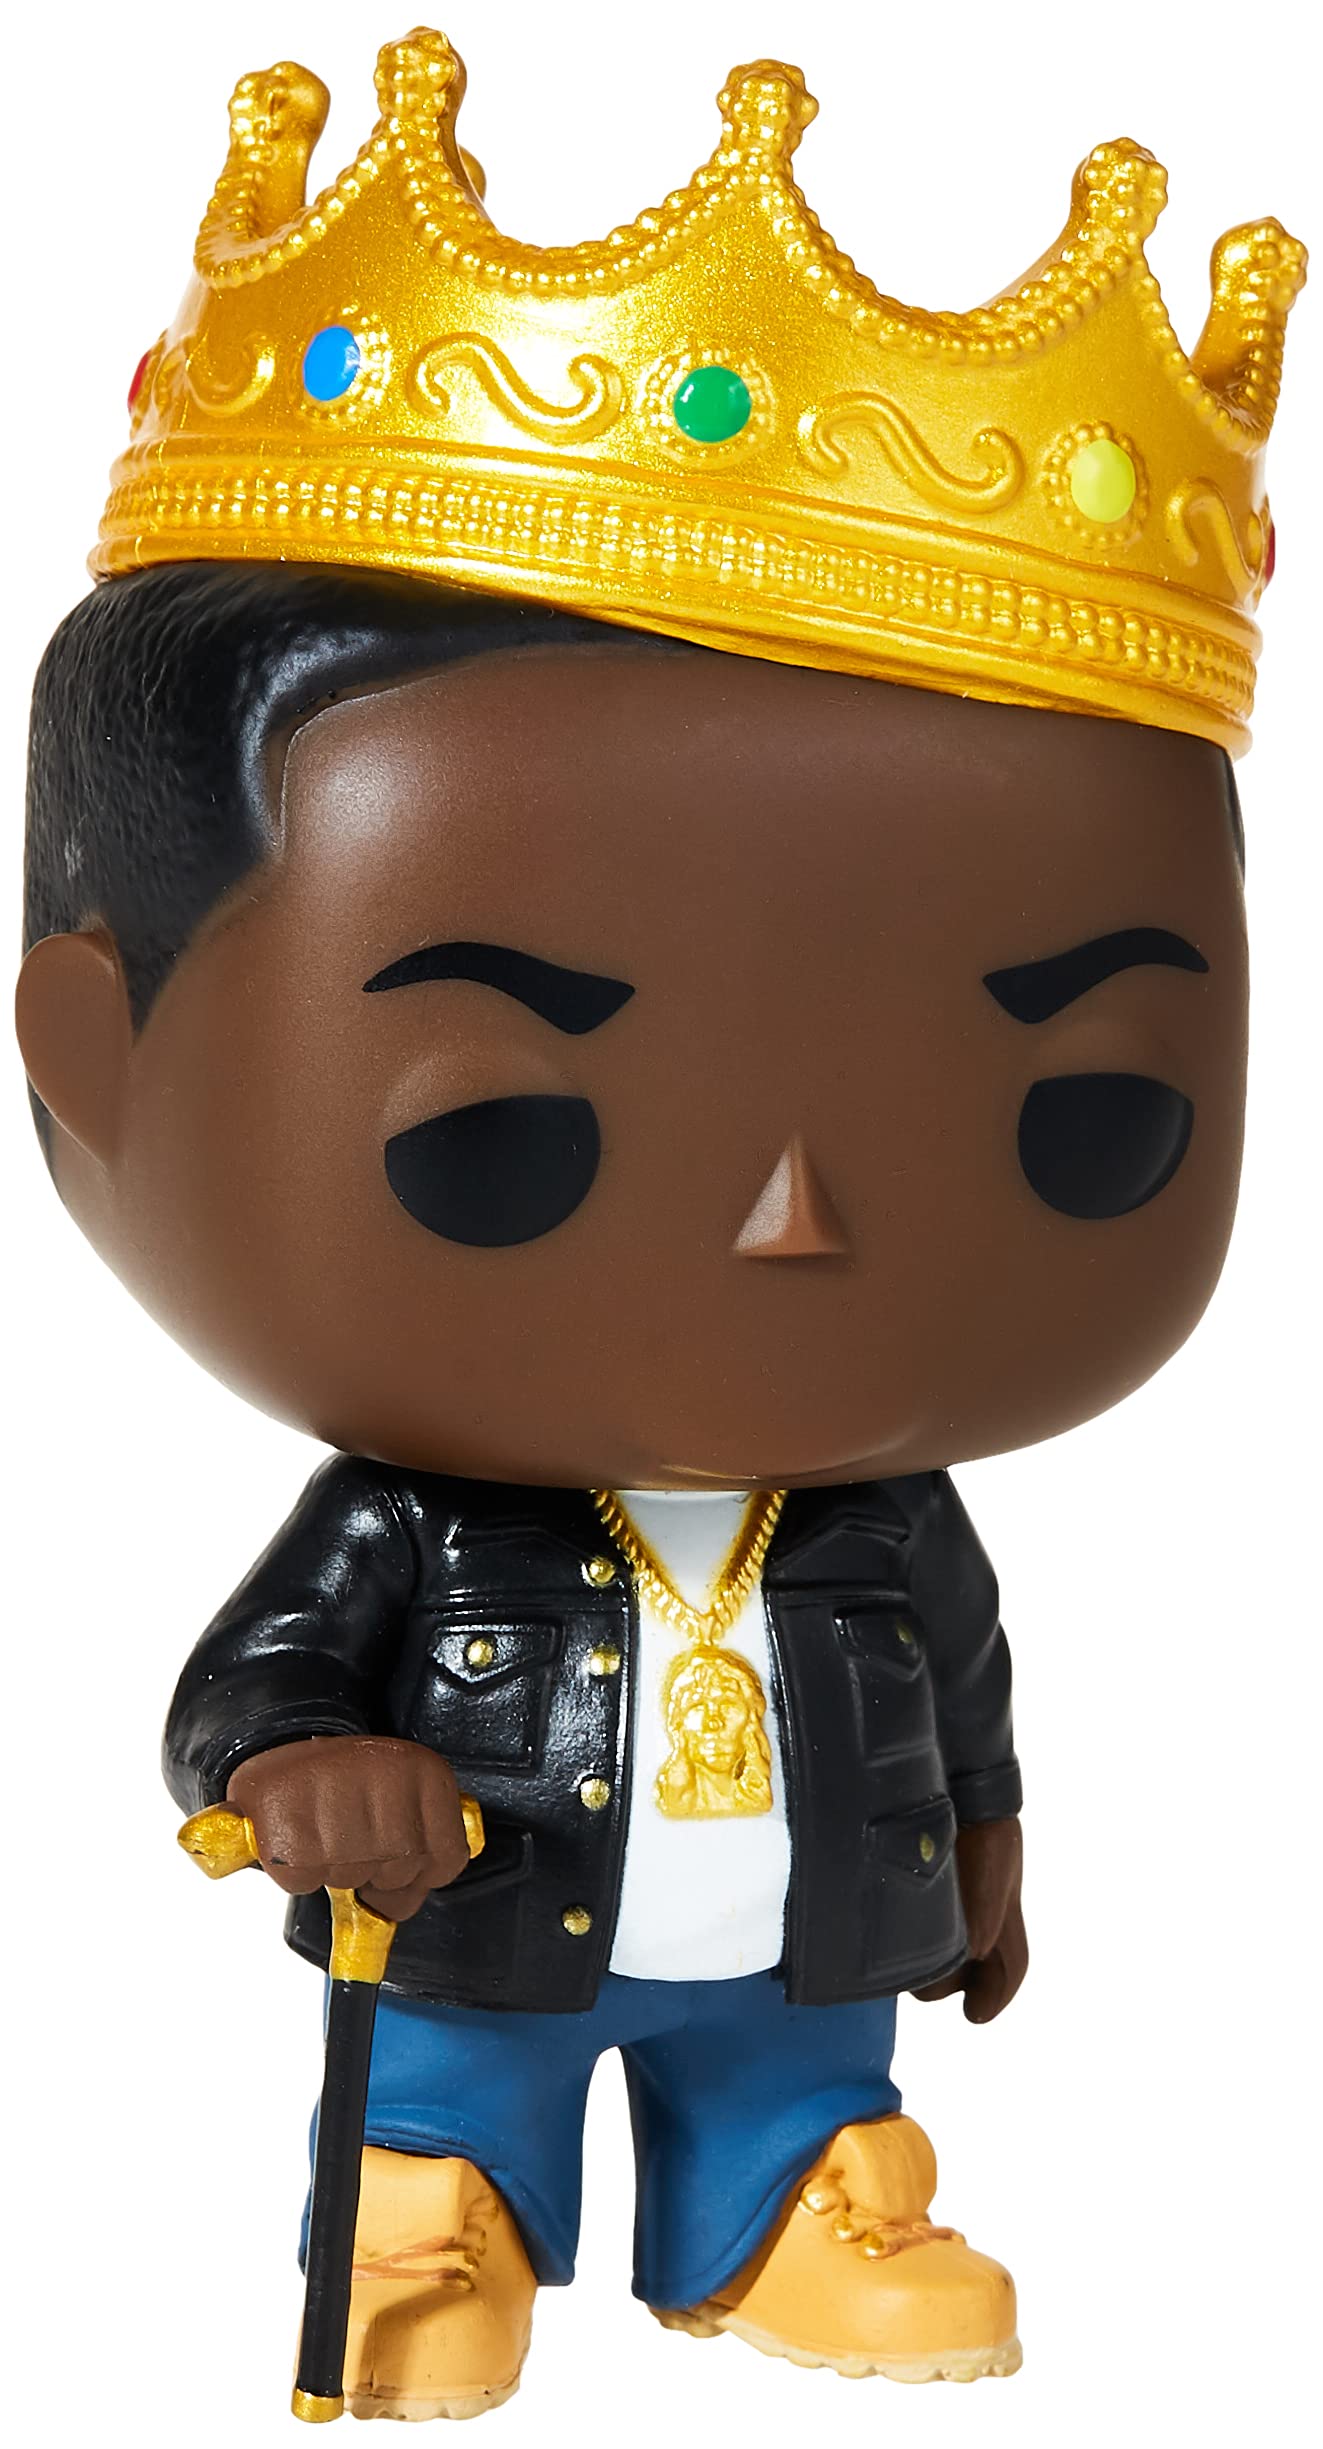 Funko Pop Rocks: Music - Notorious B.I.G. with Crown Collectible Figure, Multicolor